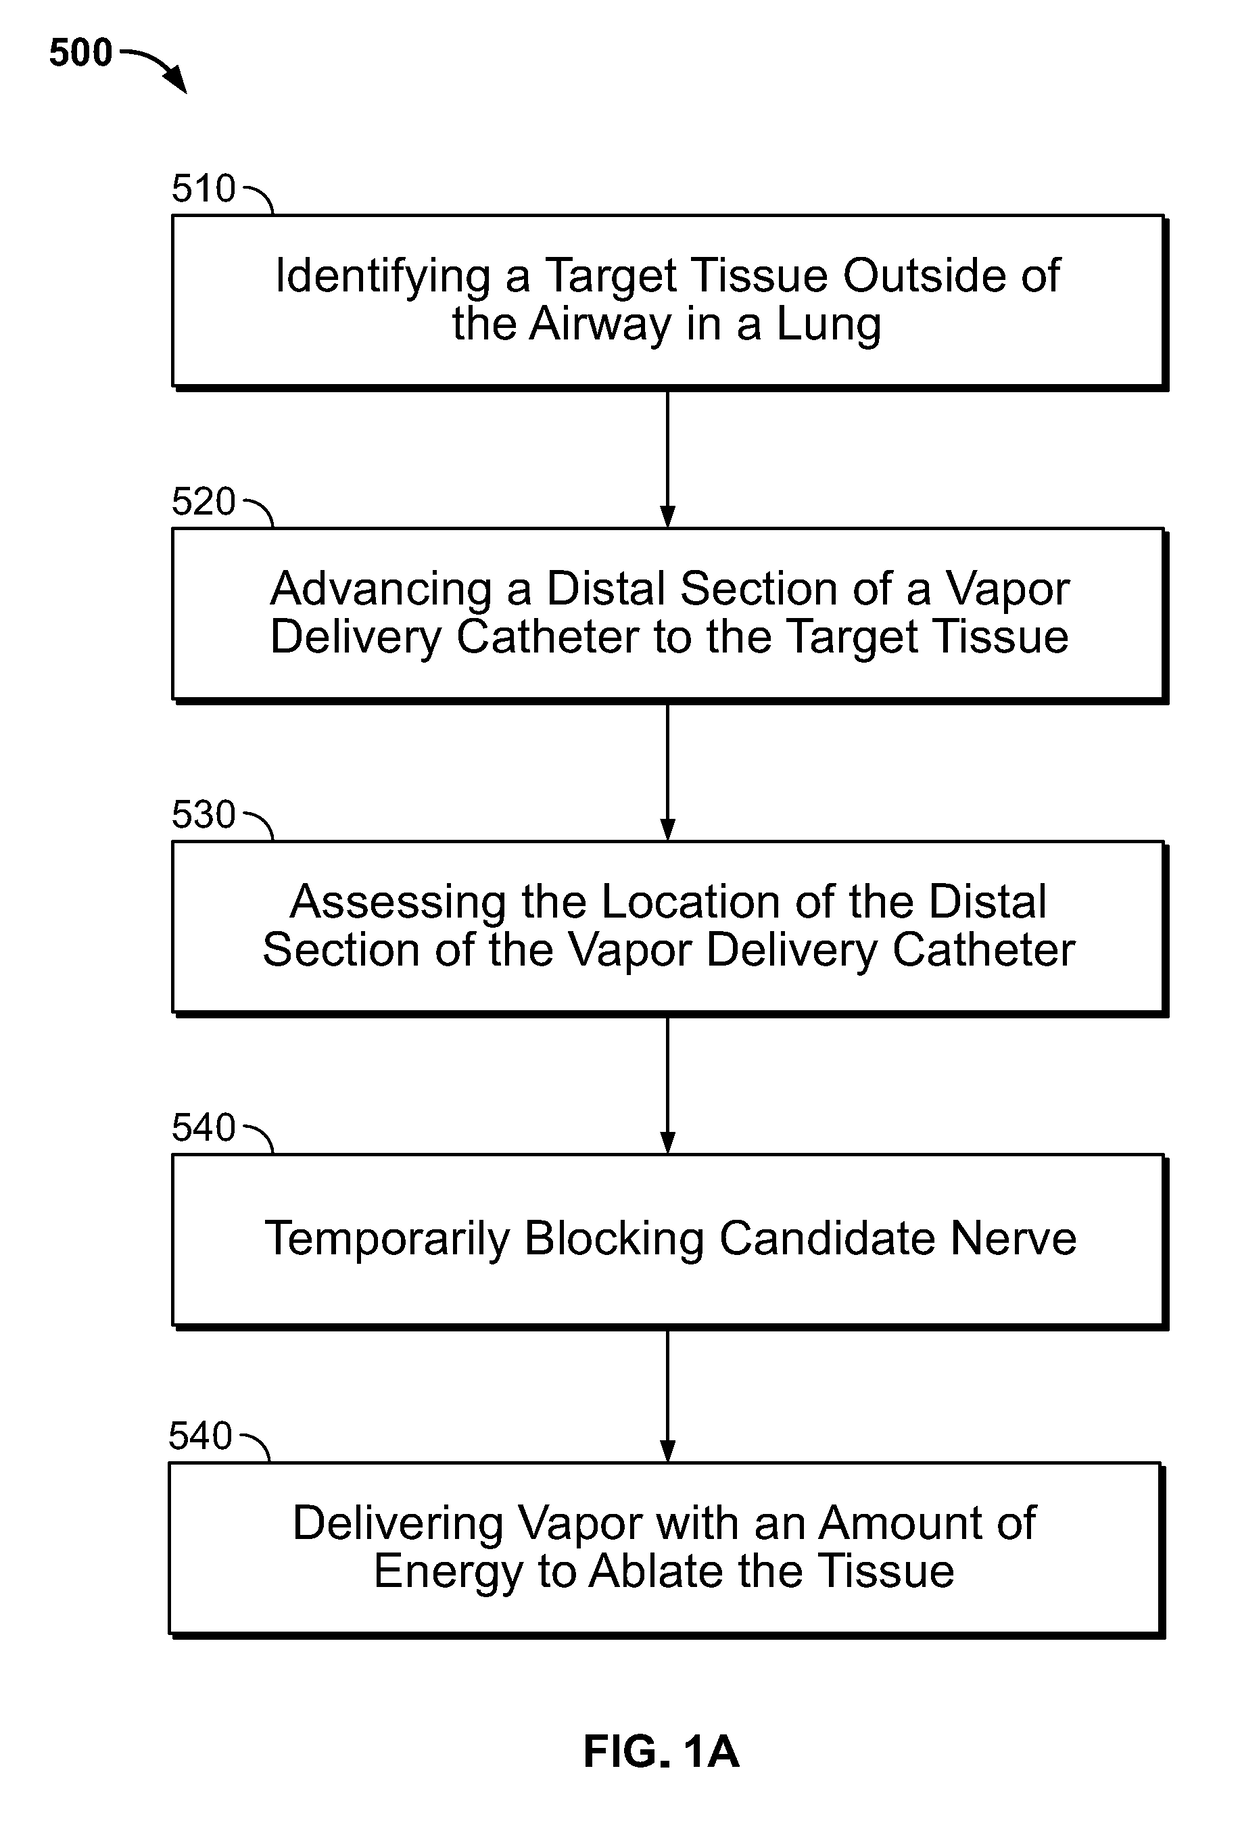 Screening method for a target nerve to ablate for the treatment of inflammatory lung disease